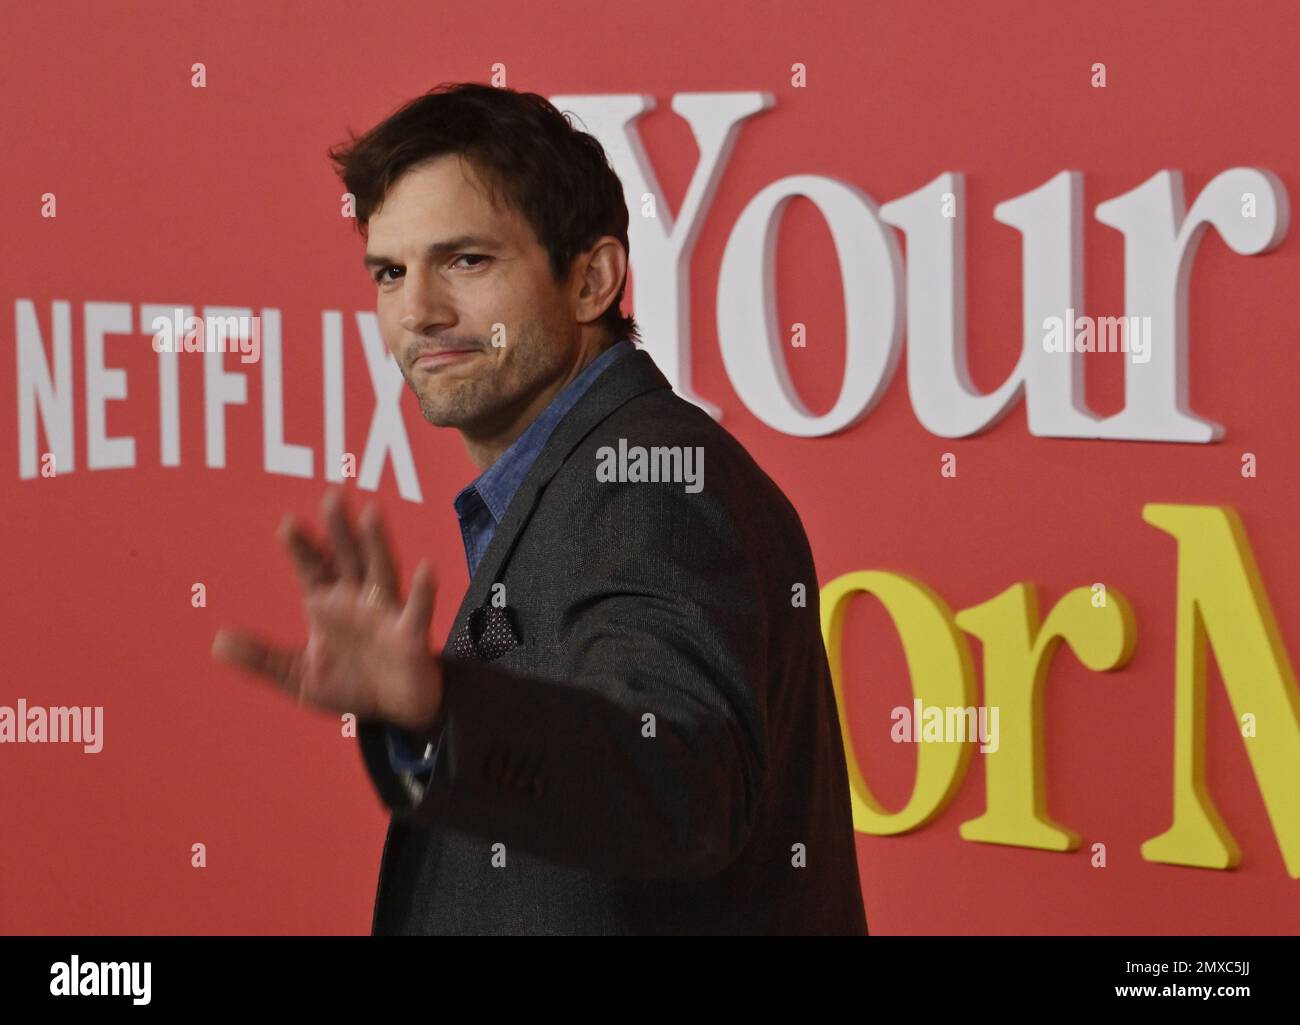 Los Angeles, United States. 02nd Feb, 2023. Cast member Ashton Kutcher attends the premiere of the motion picture romantic comedy "Your Place or Mine" at the Regency Village Theatre in the Westwood section of Los Angeles on Thursday, February 2, 2023. Storyline: Two long-distance best friends change each other's lives when she decides to pursue a lifelong dream and he volunteers to keep an eye on her teenage son. Photo by Jim Ruymen/UPI Credit: UPI/Alamy Live News Stock Photo